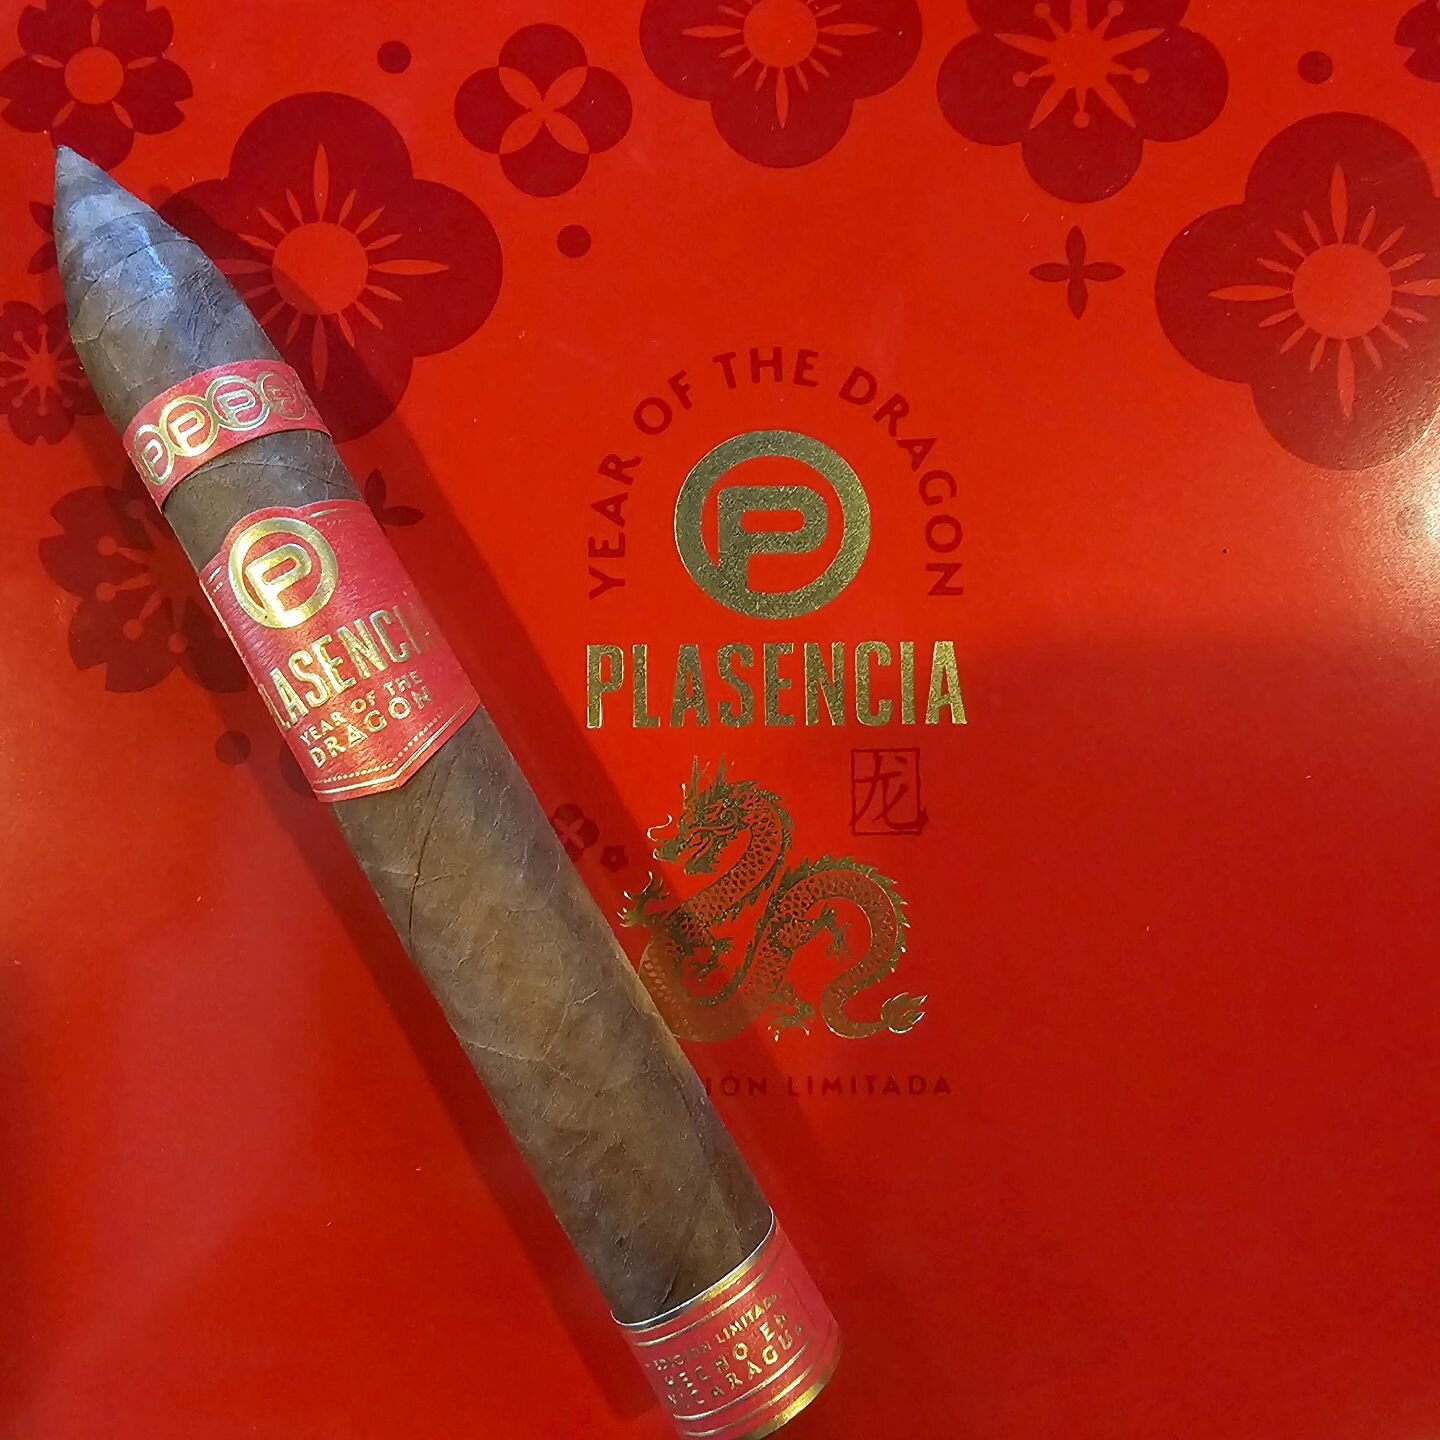 After a few week hiatus, Dan's Sunday Stogie is returning with a bang!

I'm lighting up the new, and ultra limited Plasencia Year of the Dragon. This cigar is exquisitely refined, and notes of sweet cream come to mind off the light, while still being